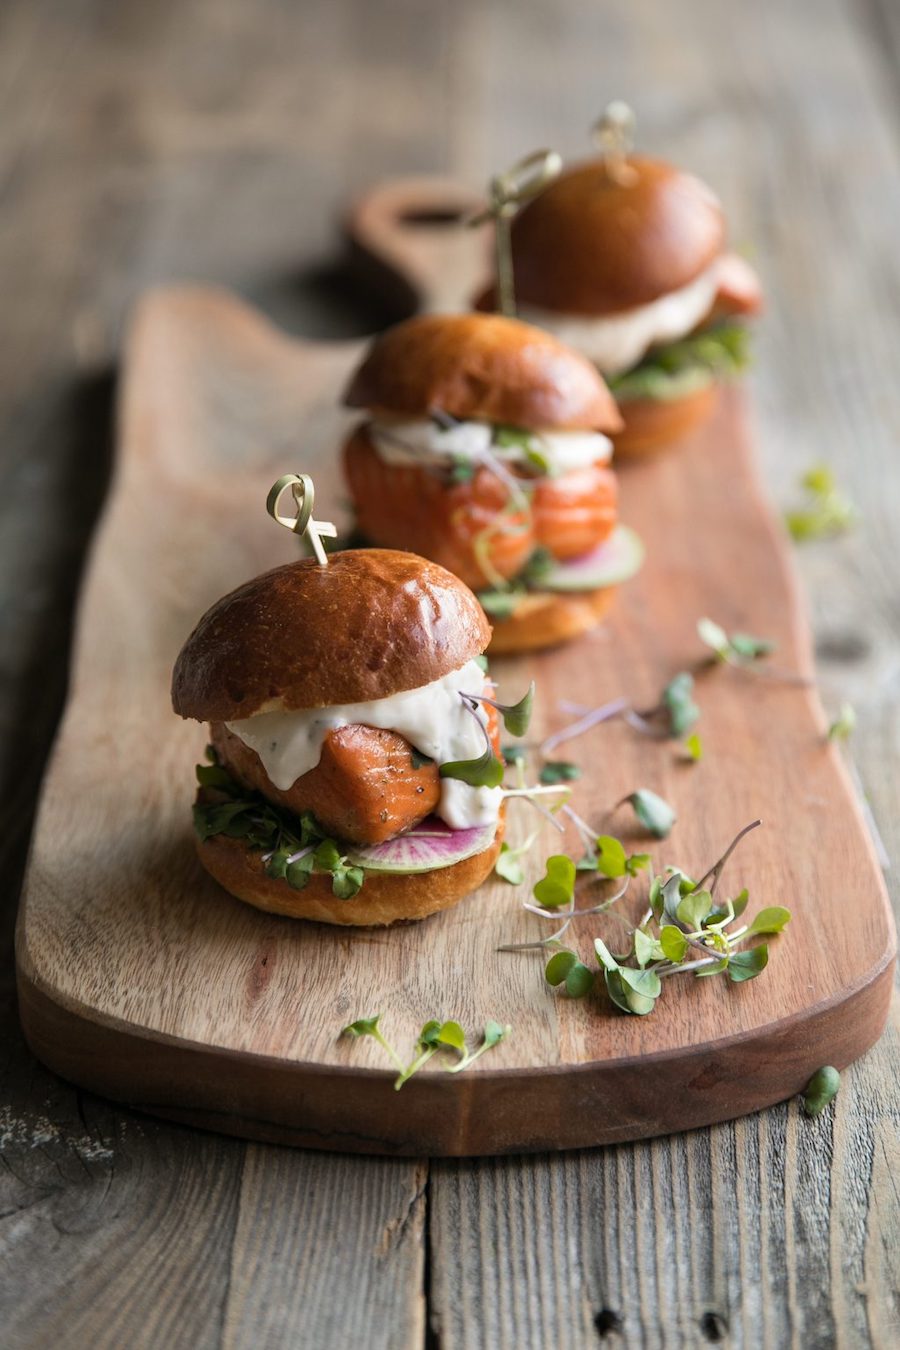 Eco-friendly burger recipes: Grilled Salmon Burgers at The Forked Spoon